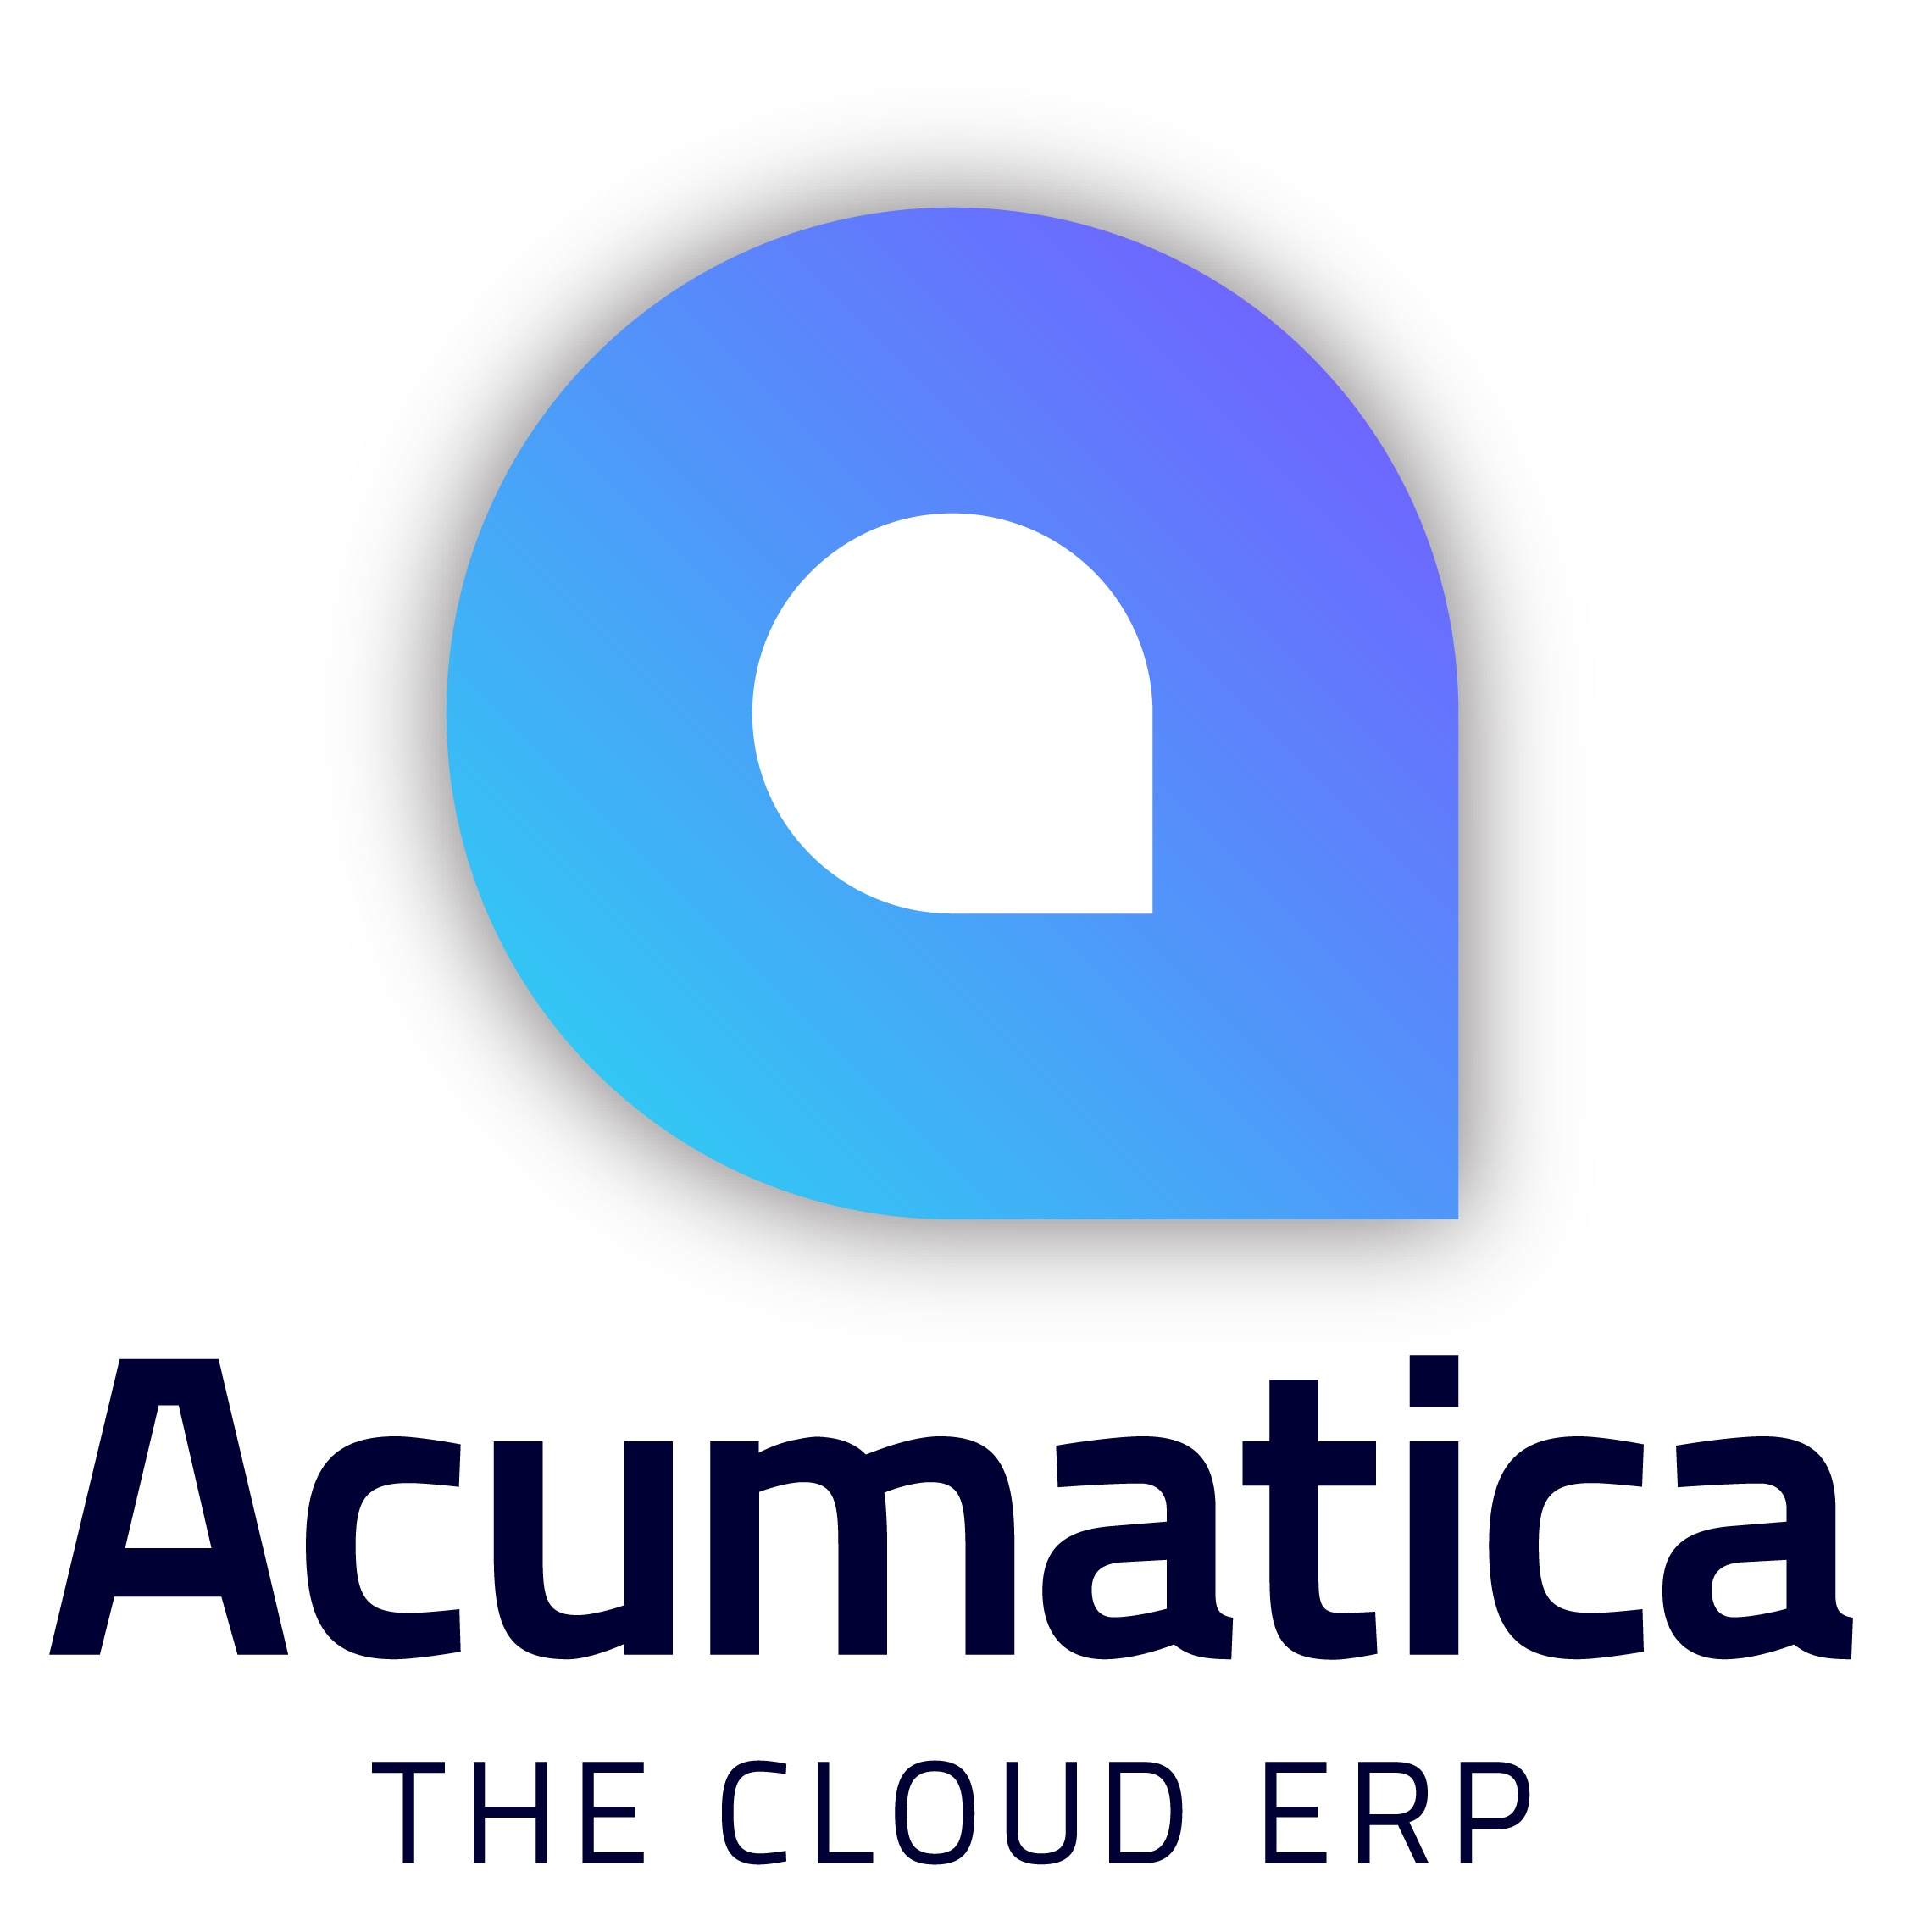 How Acumatica Plays to Your Strengths